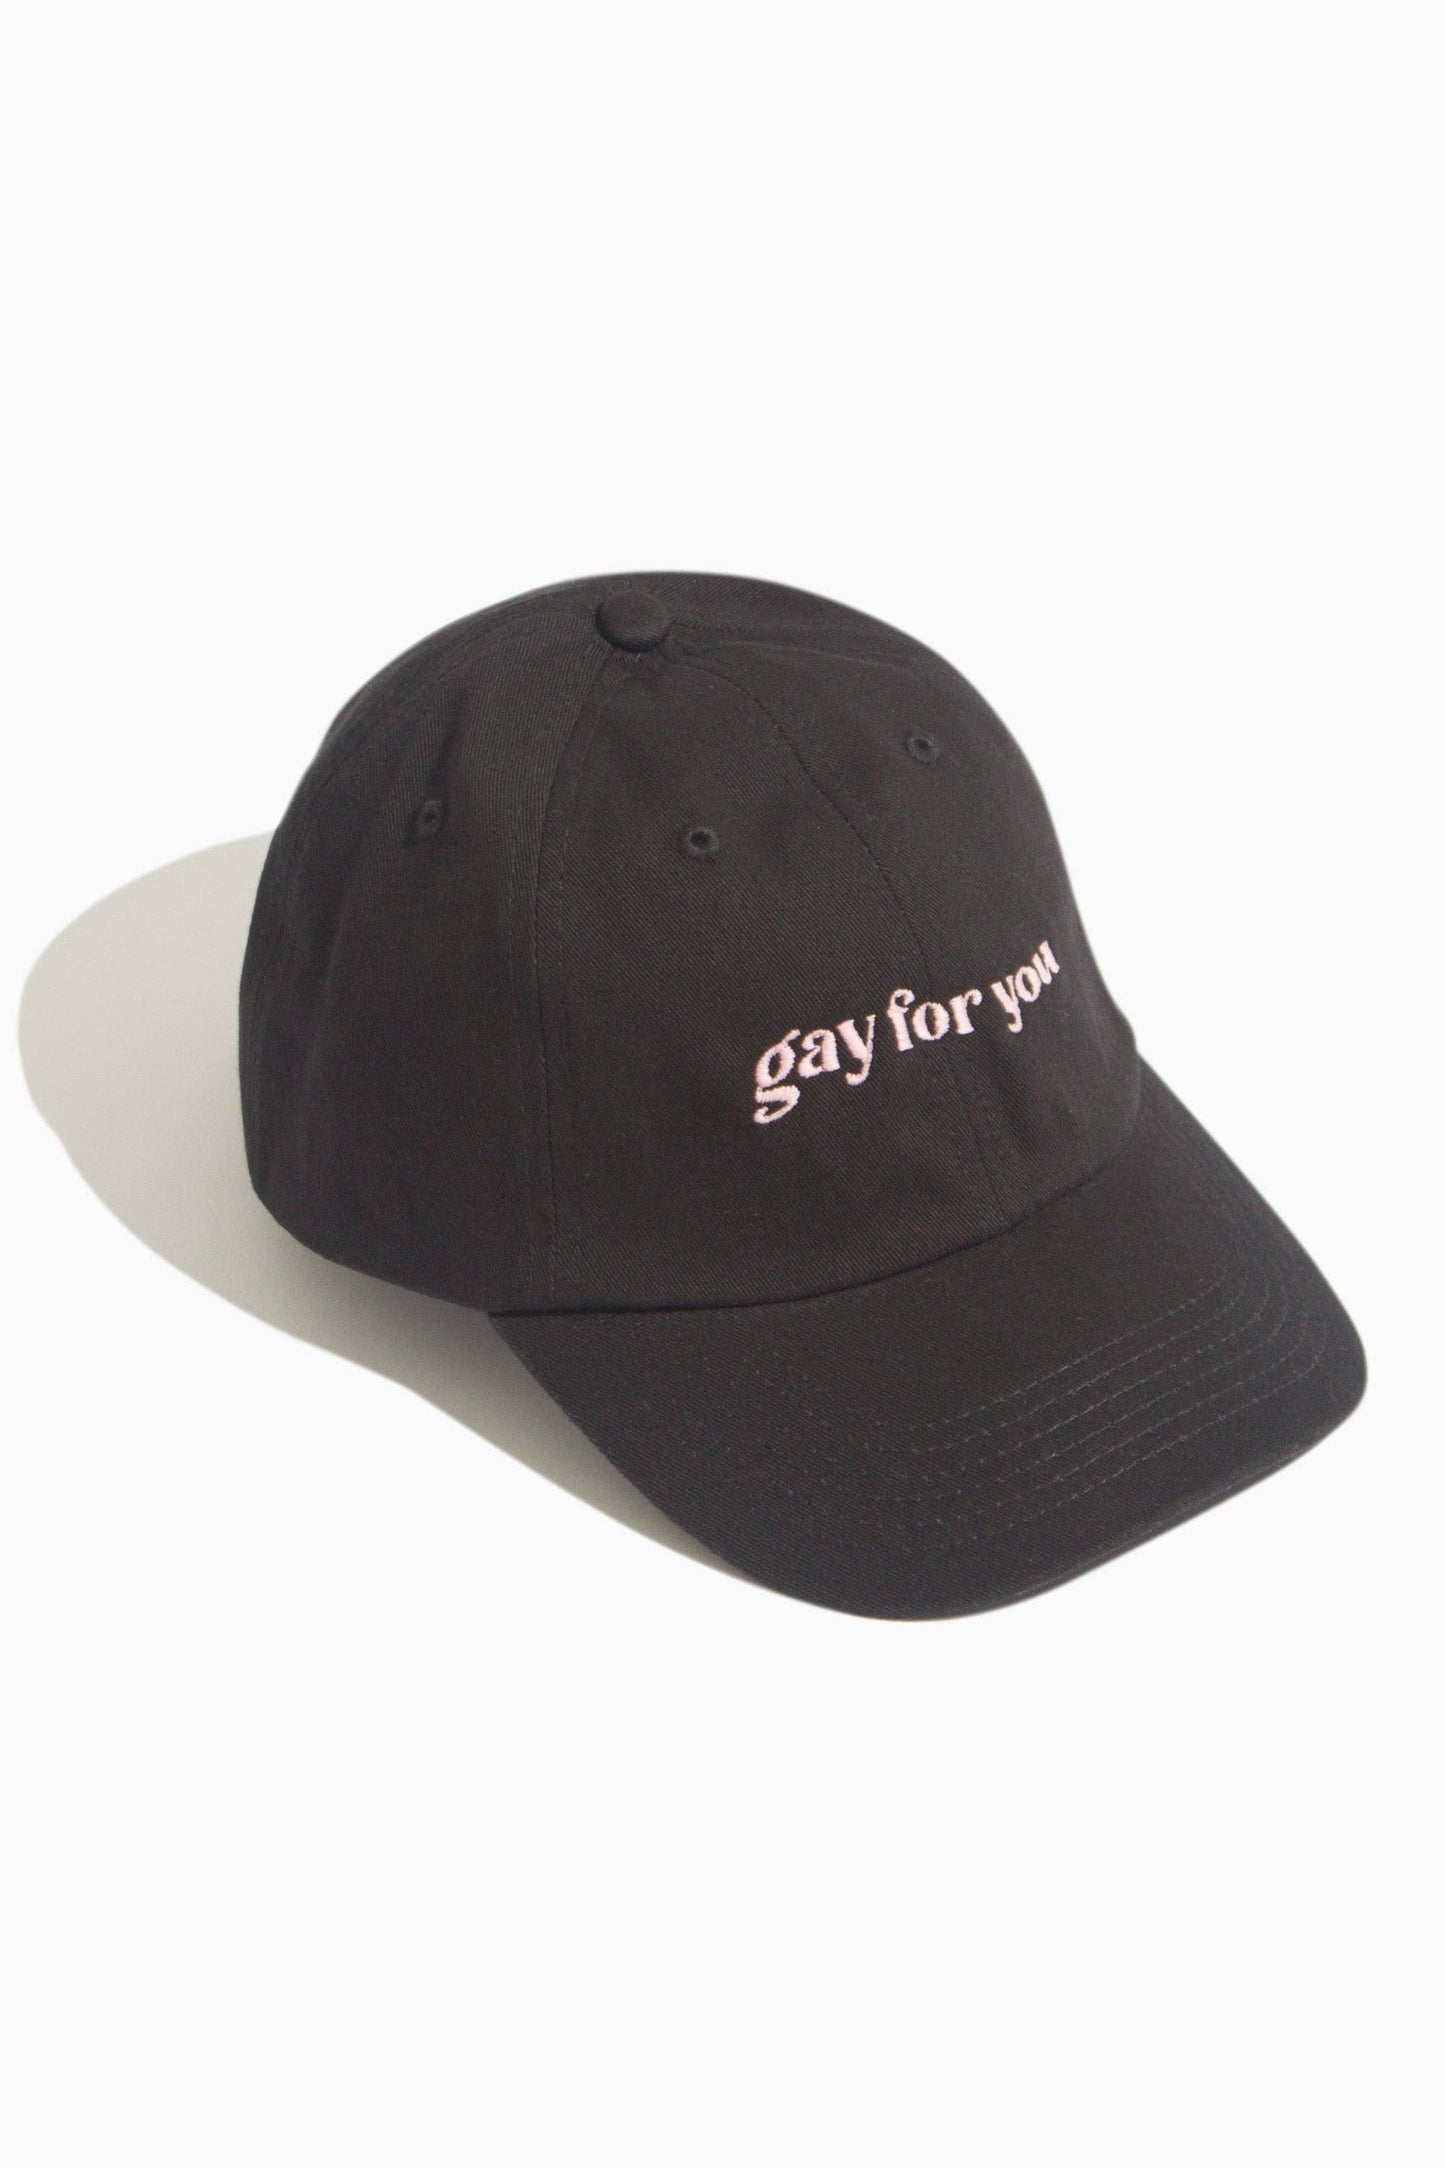 Gay For You Embroidered Black Baseball Hat